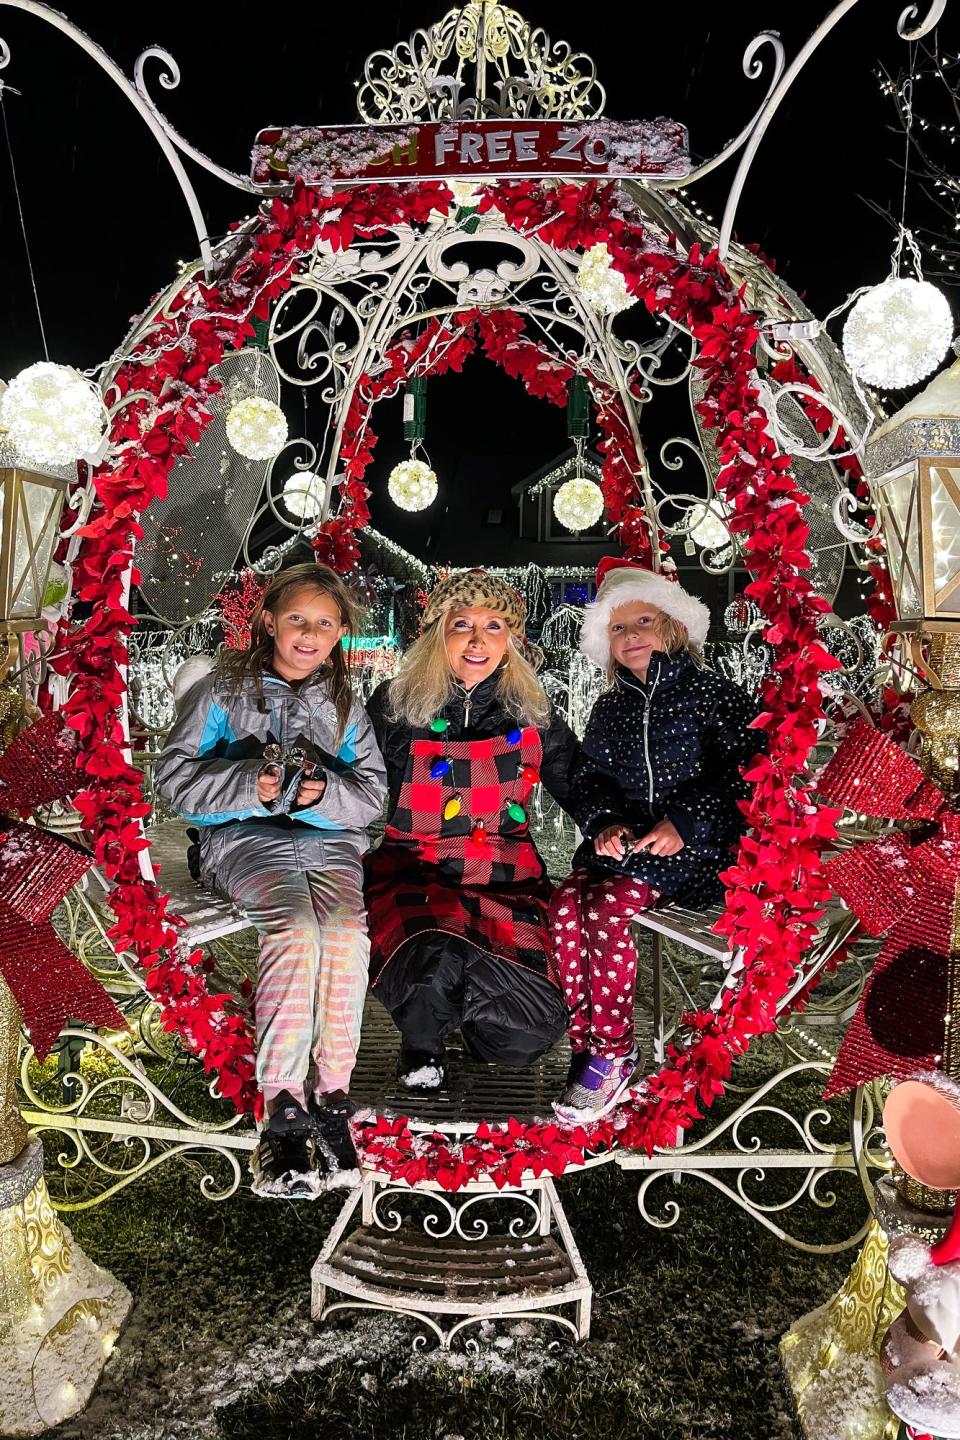 Cheryl Underwood, center, poses with two young visitors to her holiday lights display outside her home on Friday, Dec.16, 2022, on Damon Road in Williamstown Township.
(Photo: Provided photo)